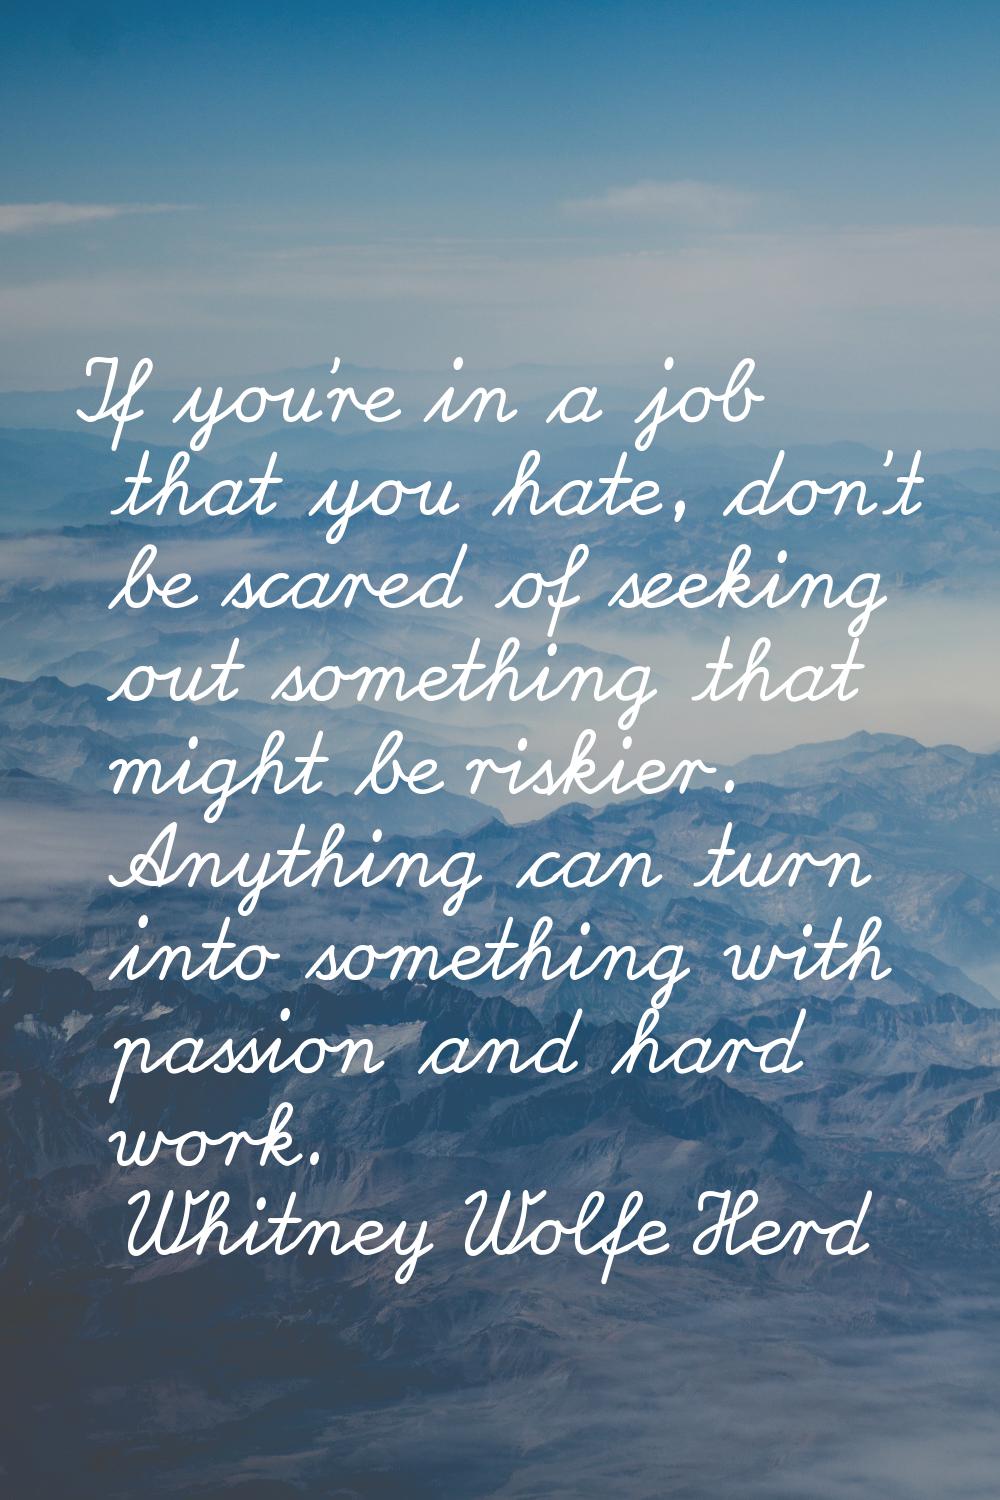 If you're in a job that you hate, don't be scared of seeking out something that might be riskier. A